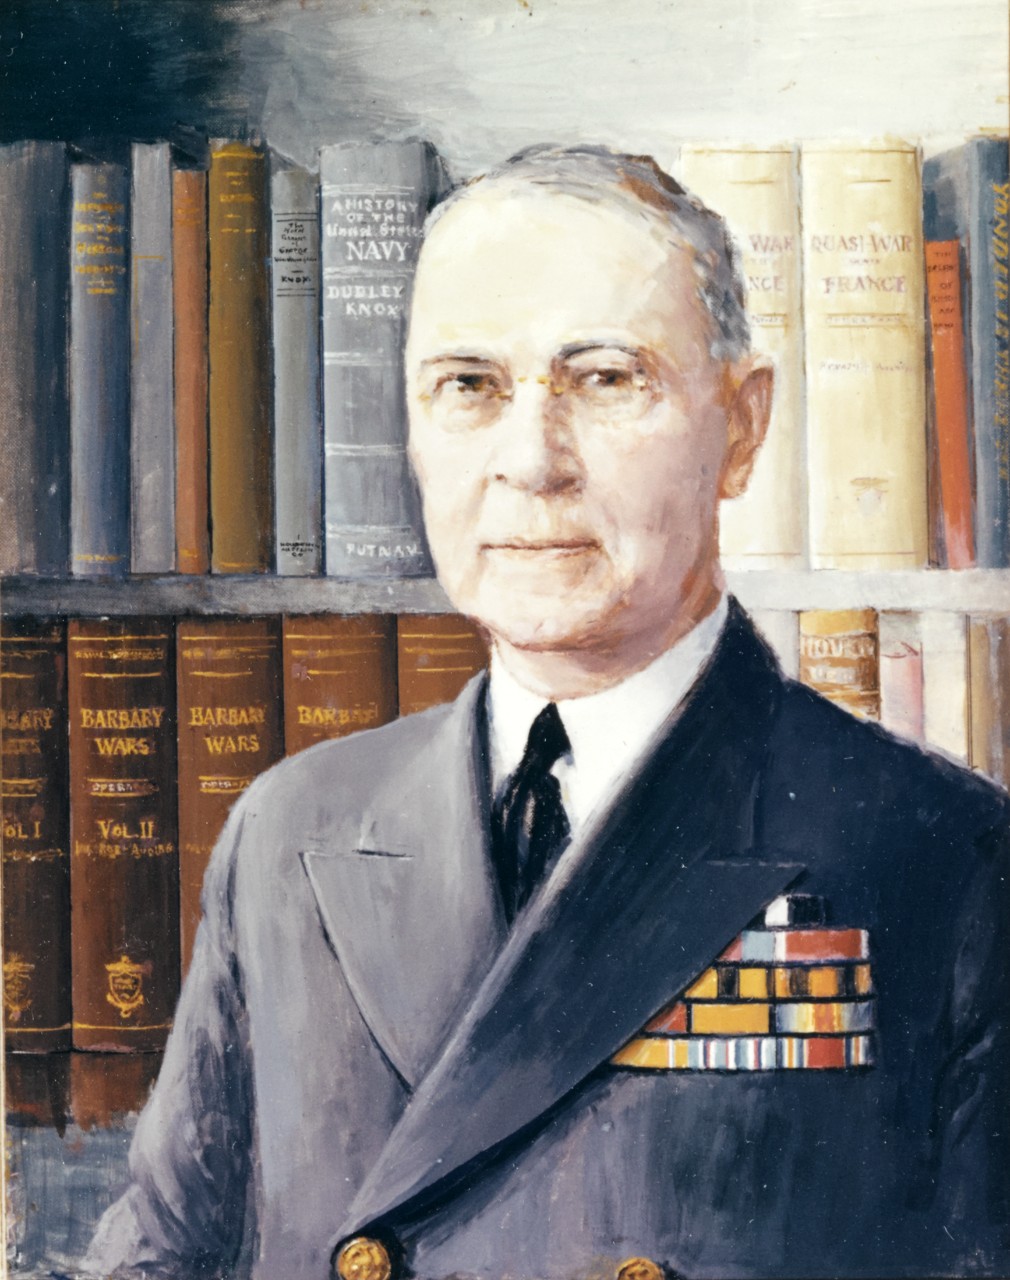 Commodore Dudley W. Knox, USN, 1967 photograph of an oil painting by Captain Charles Bittinger, USNR, which was presented to the Naval Historical Foundation by Mrs. Knox on 19 November 1962.